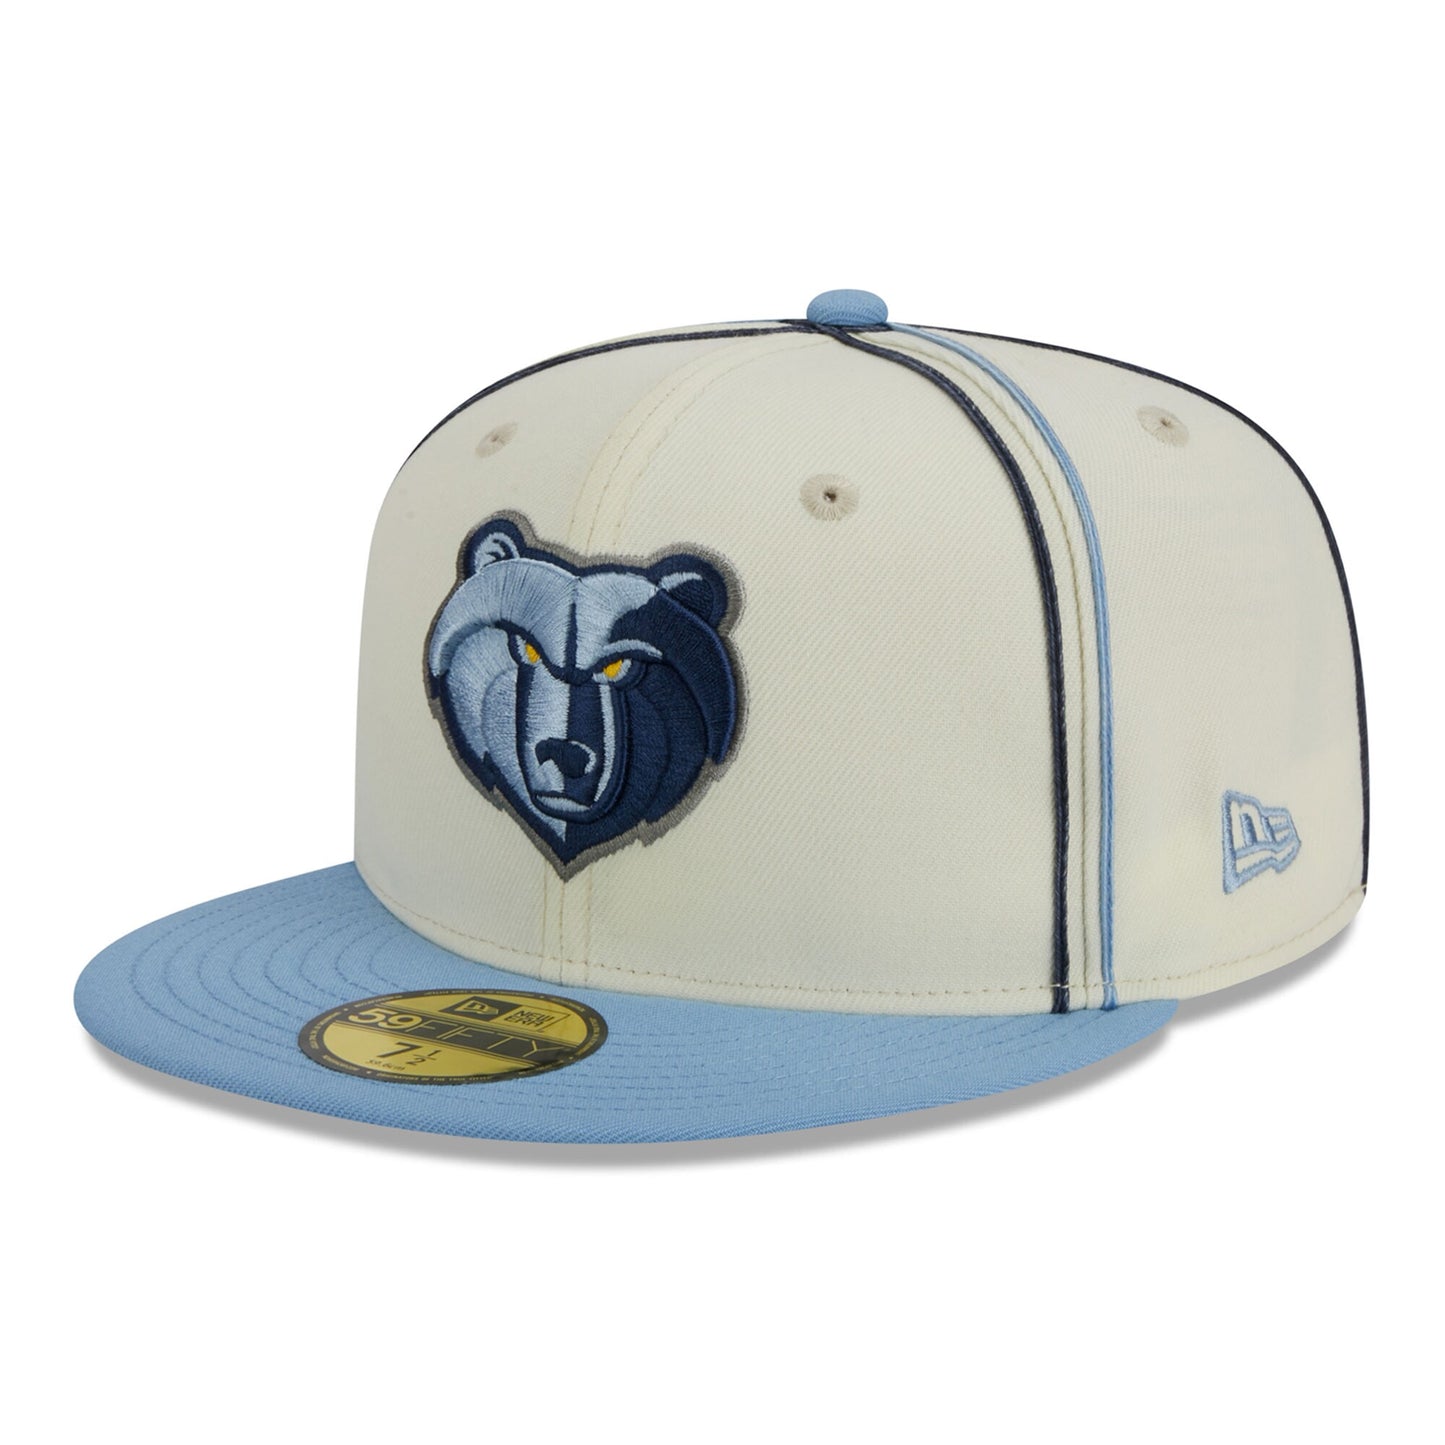 Memphis Grizzlies New Era Piping 2-Tone 59FIFTY Fitted Hat - Cream/Light Blue